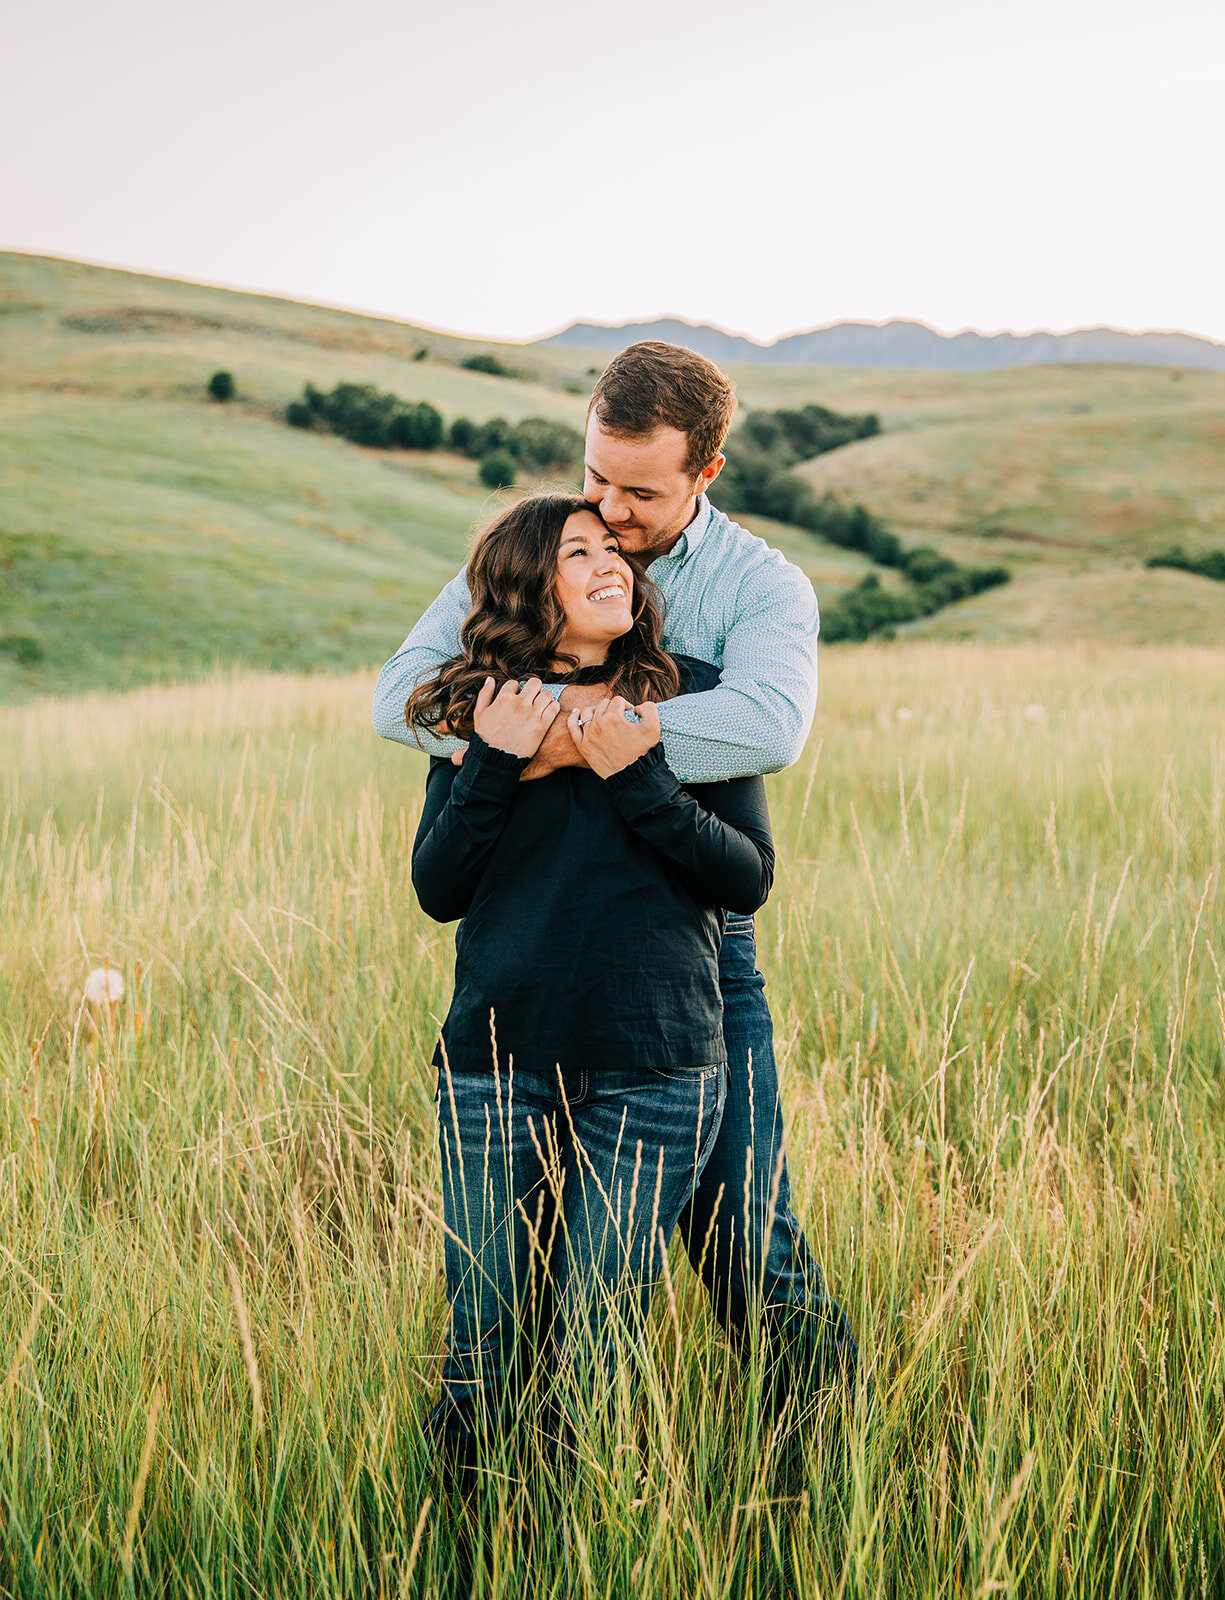  Utah couple summer time engagement session forehead kisses dreamy engagements loving couple embracing couple happy couple outfit inspo paradise Utah professional cache valley photographer future mr and mrs country couple semi formal outfit inspo rel